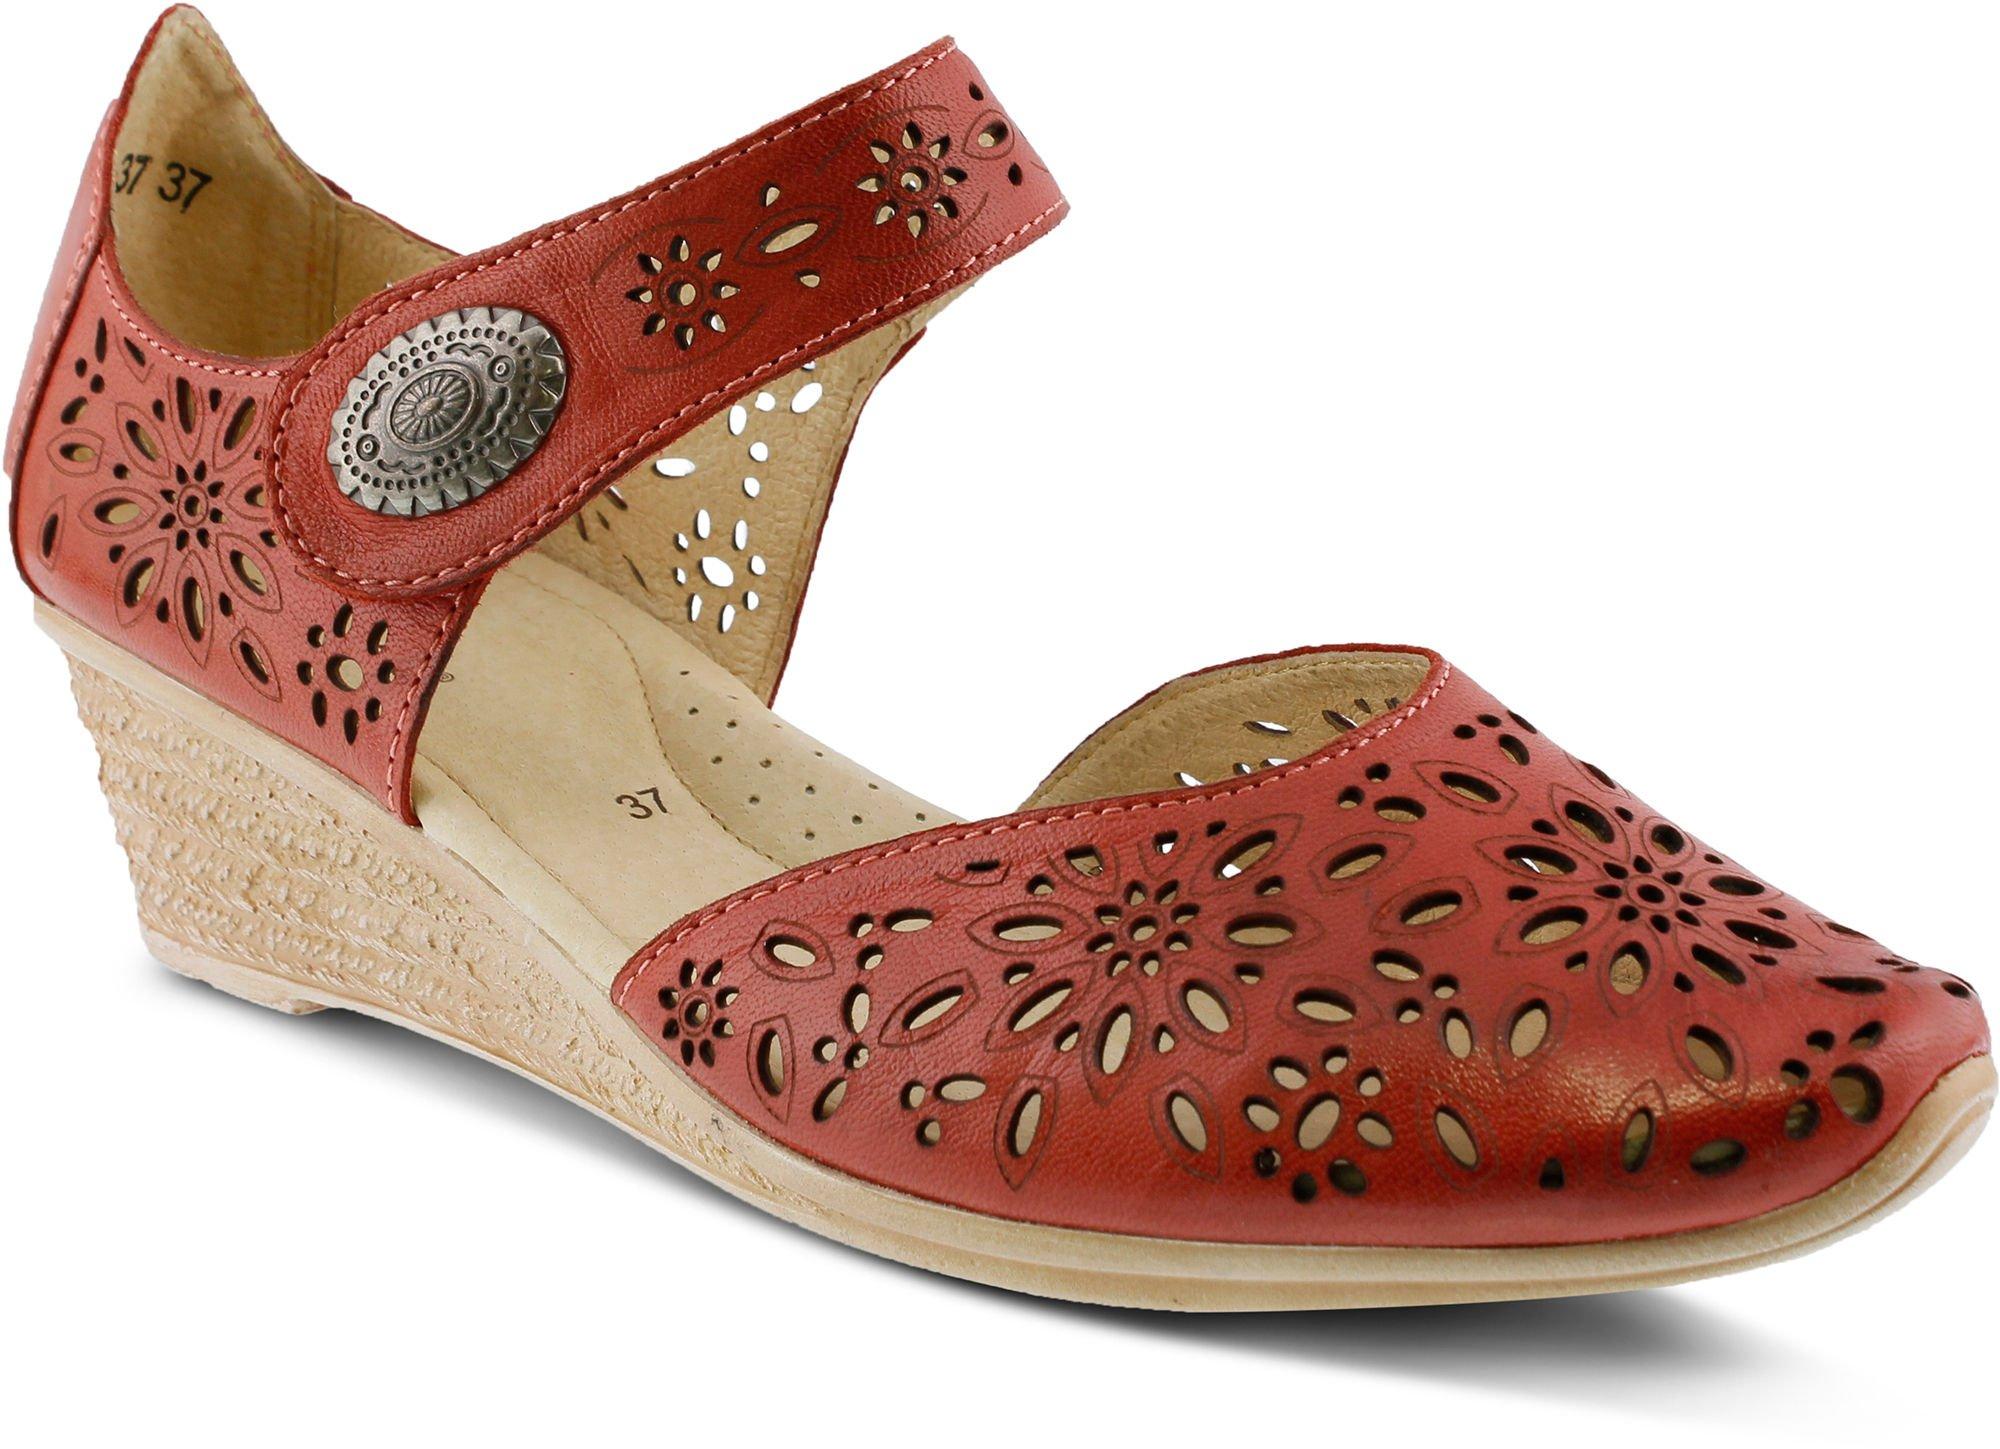 Womens Nougat Wedge Shoes